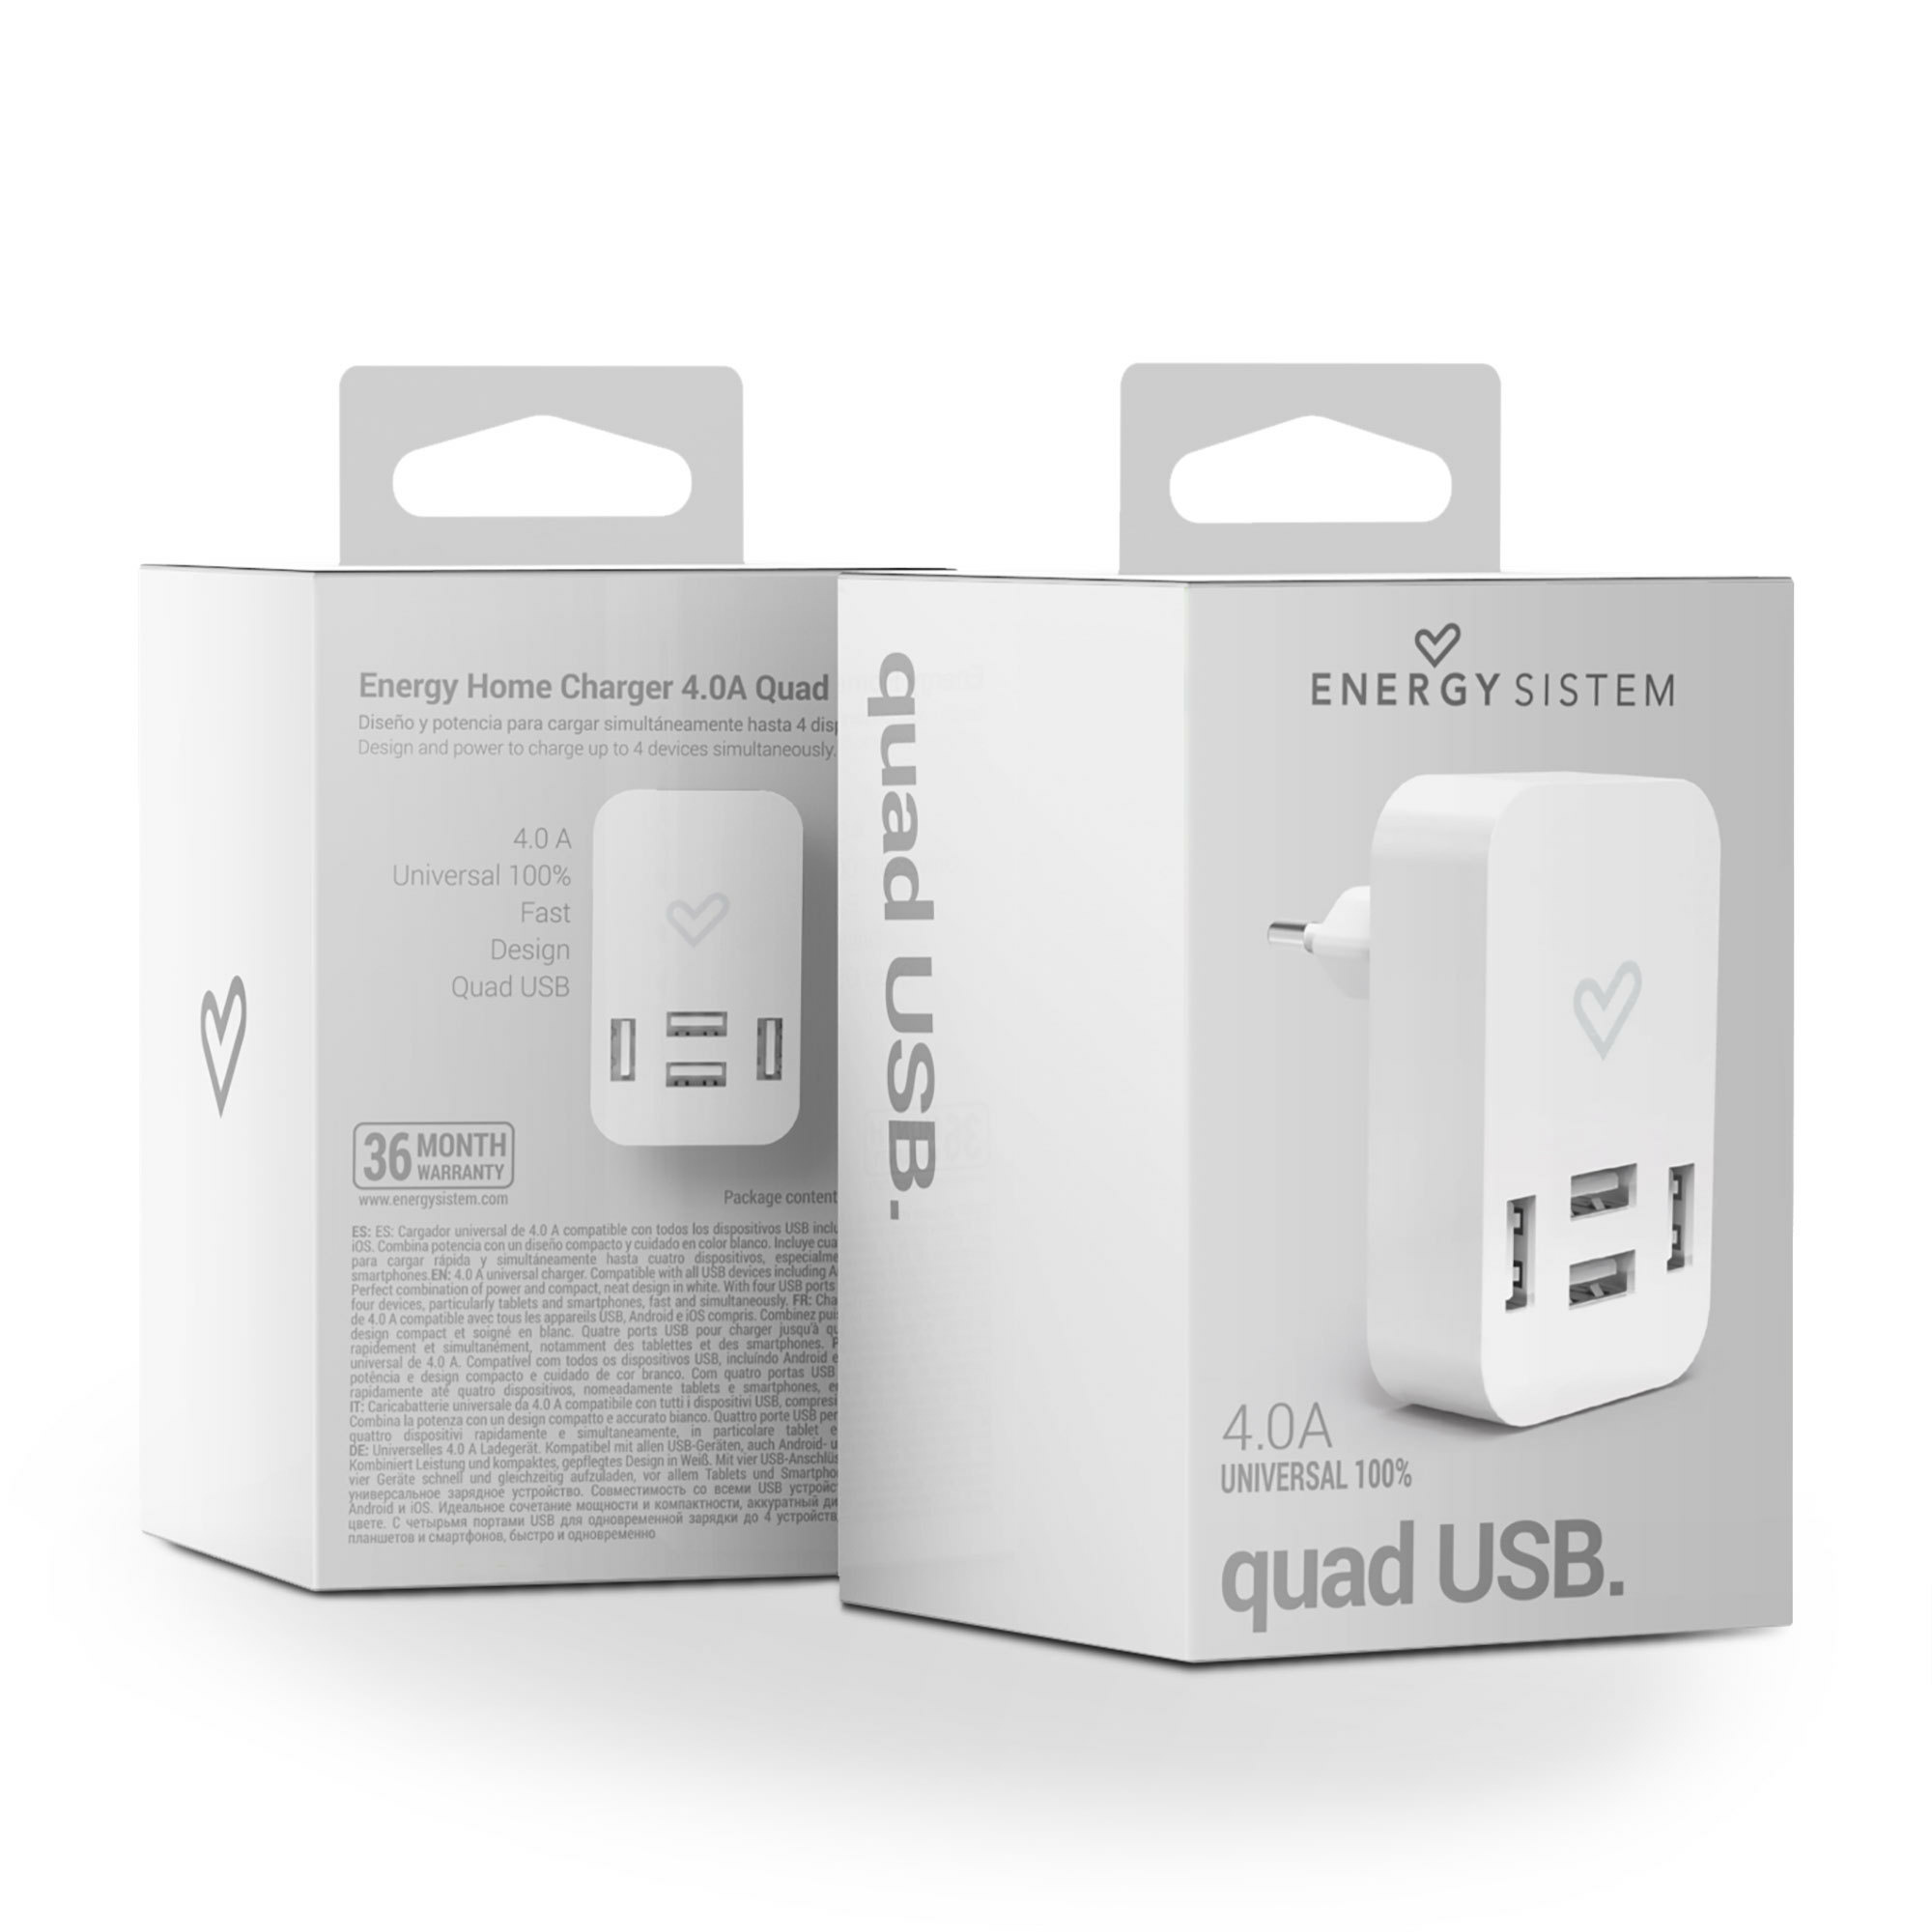 Verpackung von Energy Home Charger 4.0A Quad USB